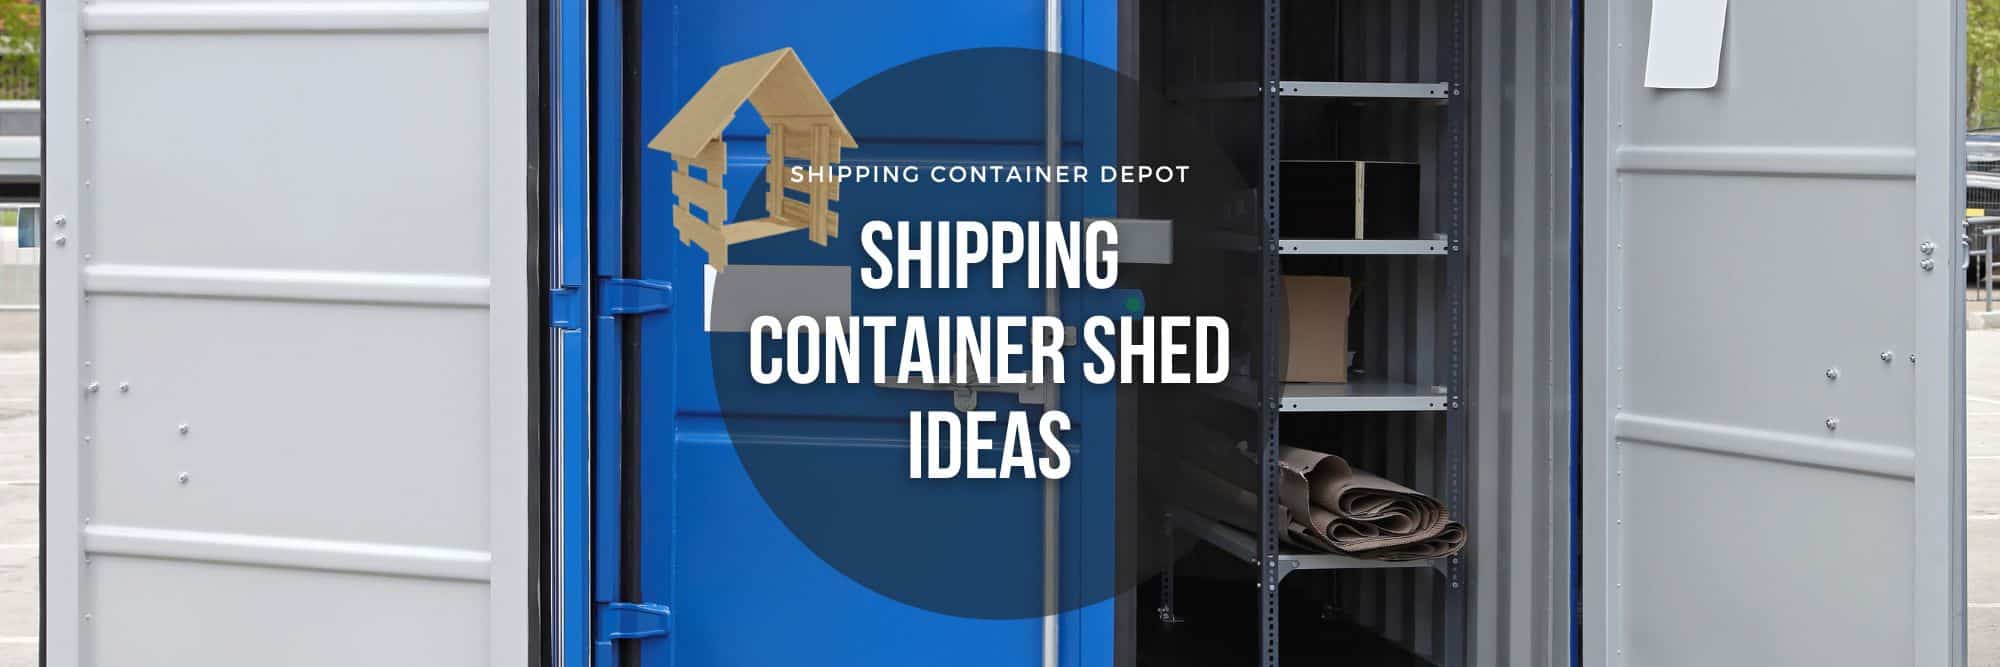 shelving  Metal storage containers, Shipping container sheds